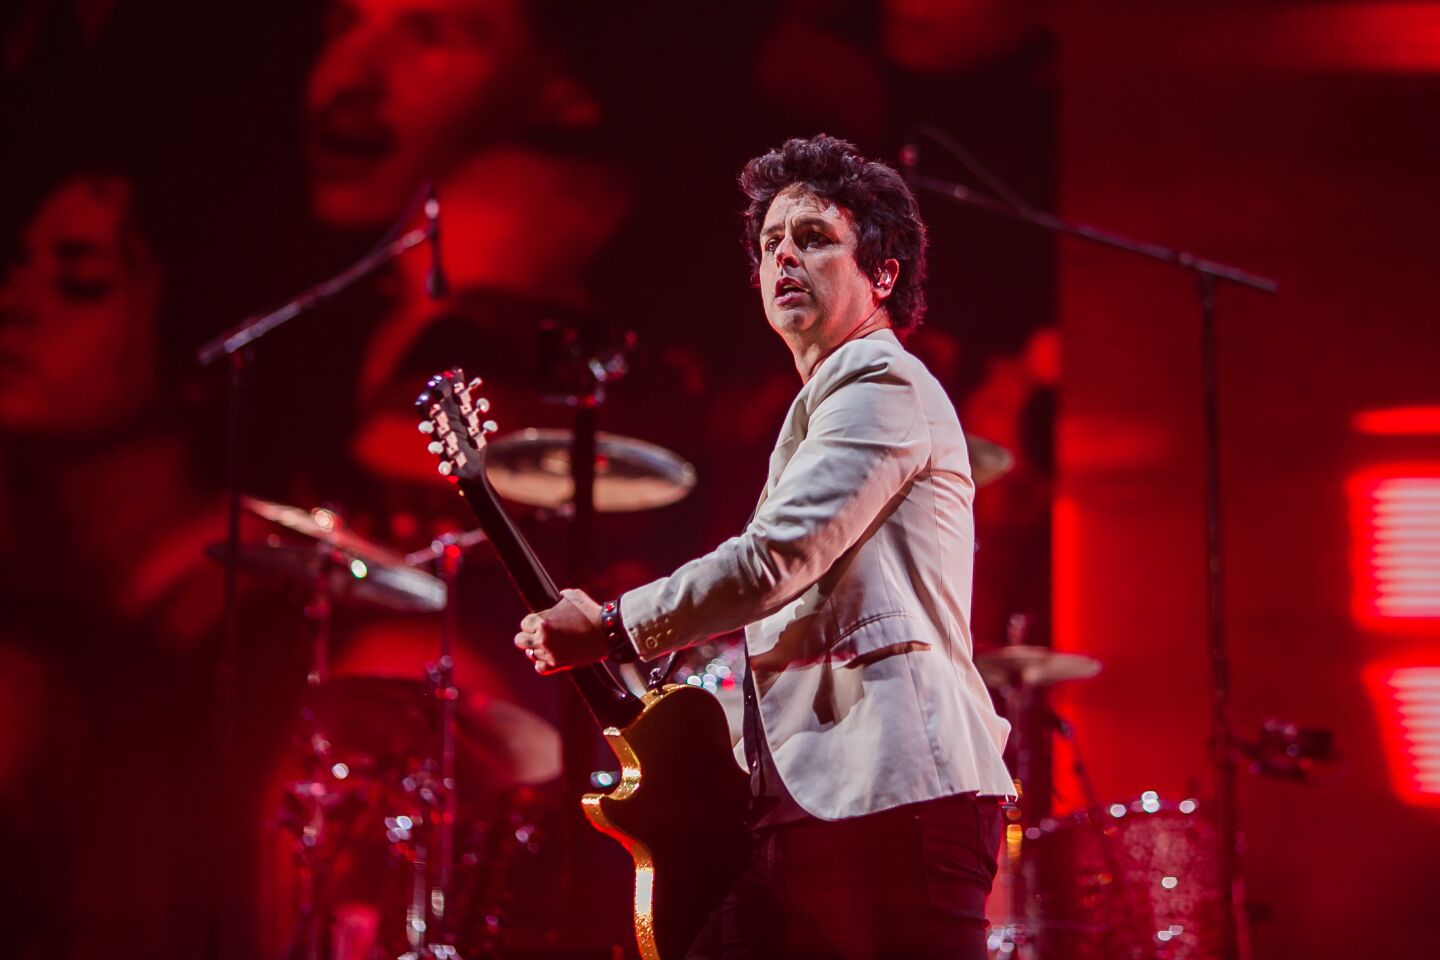 Singer Billie Joe Armstrong of Green Day during the Hella Mega Tour at Petco Park in downtown San Diego on August 29, 2021.